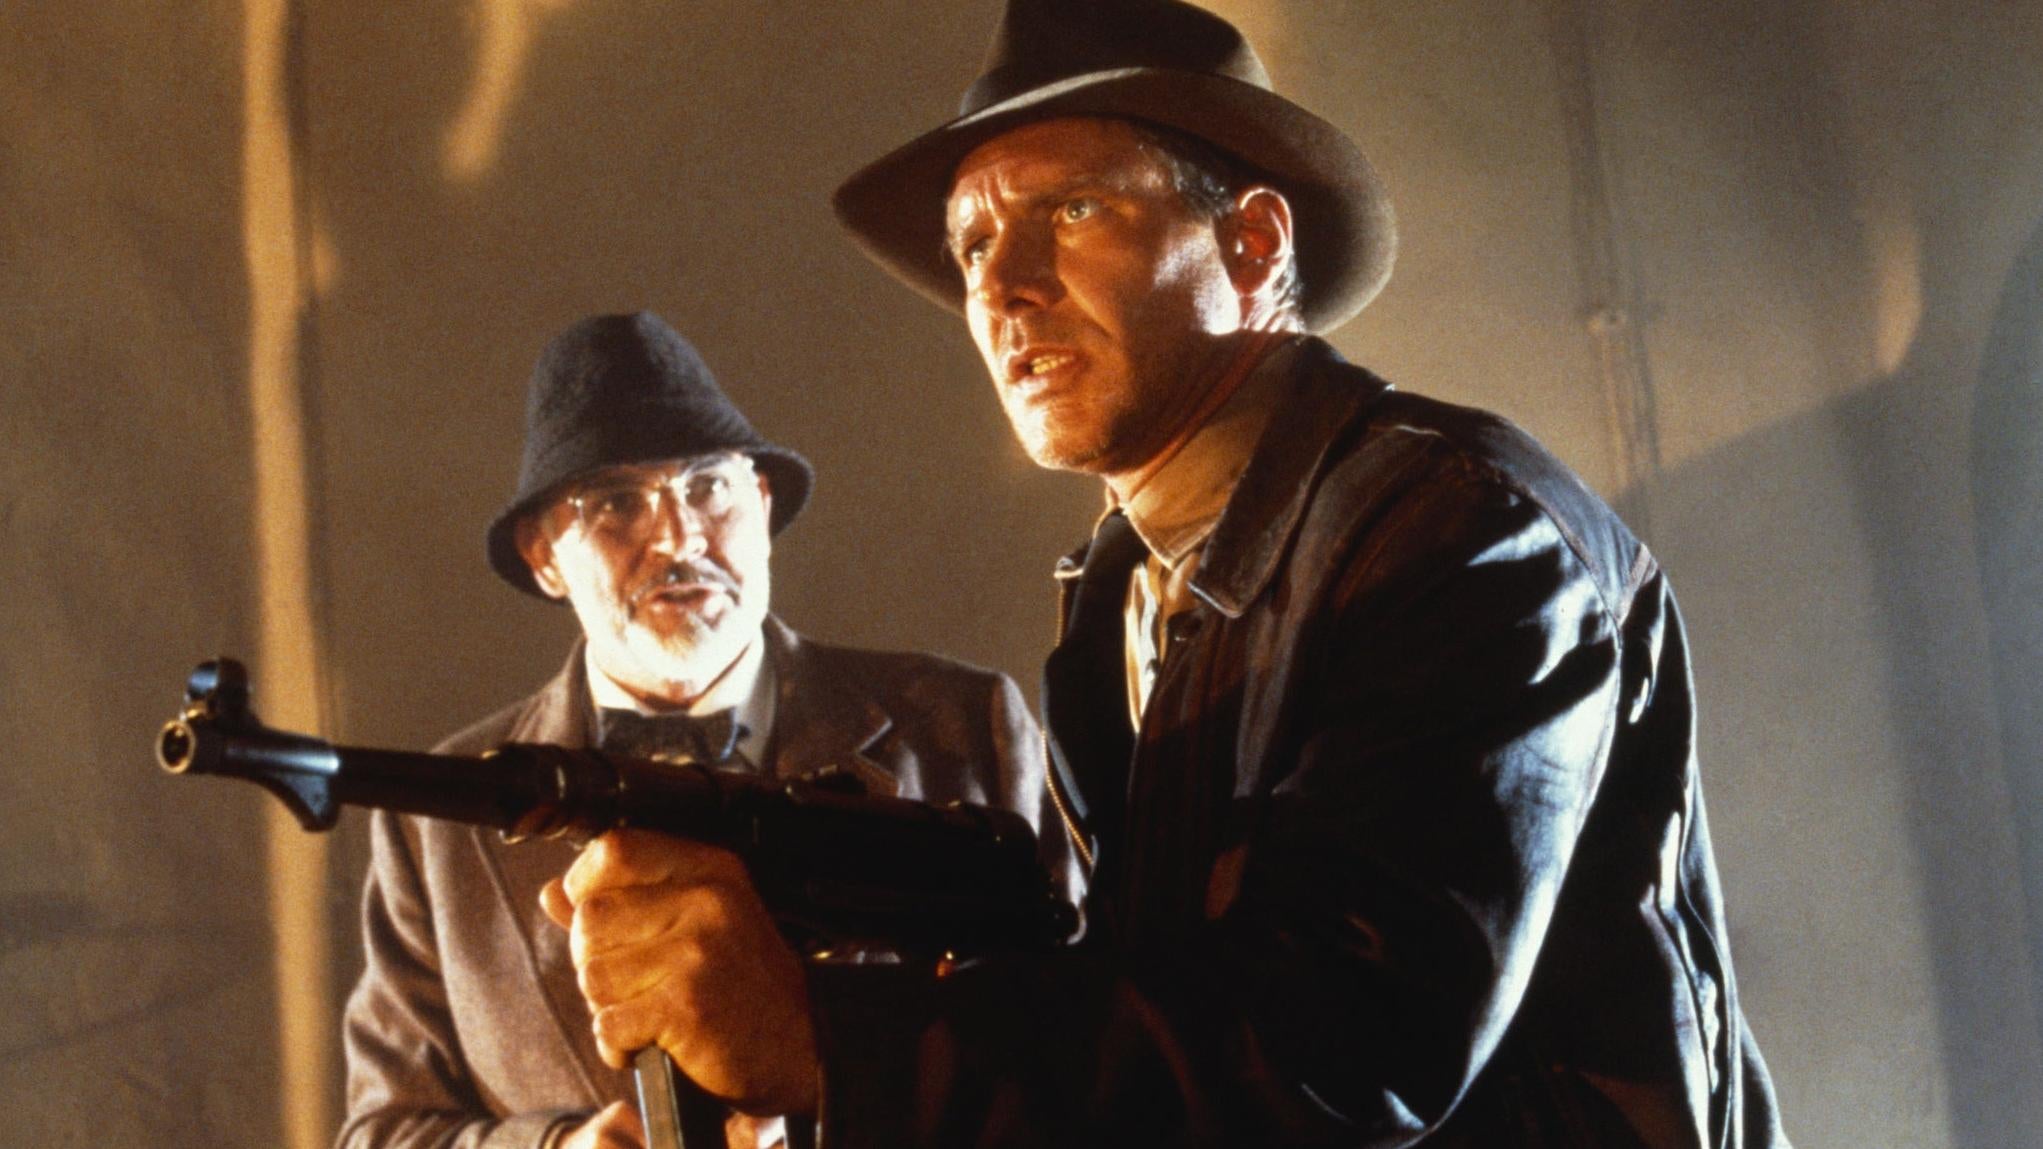 An all-timer comedic duo: Indy and Henry. (Image: Lucasfilm)